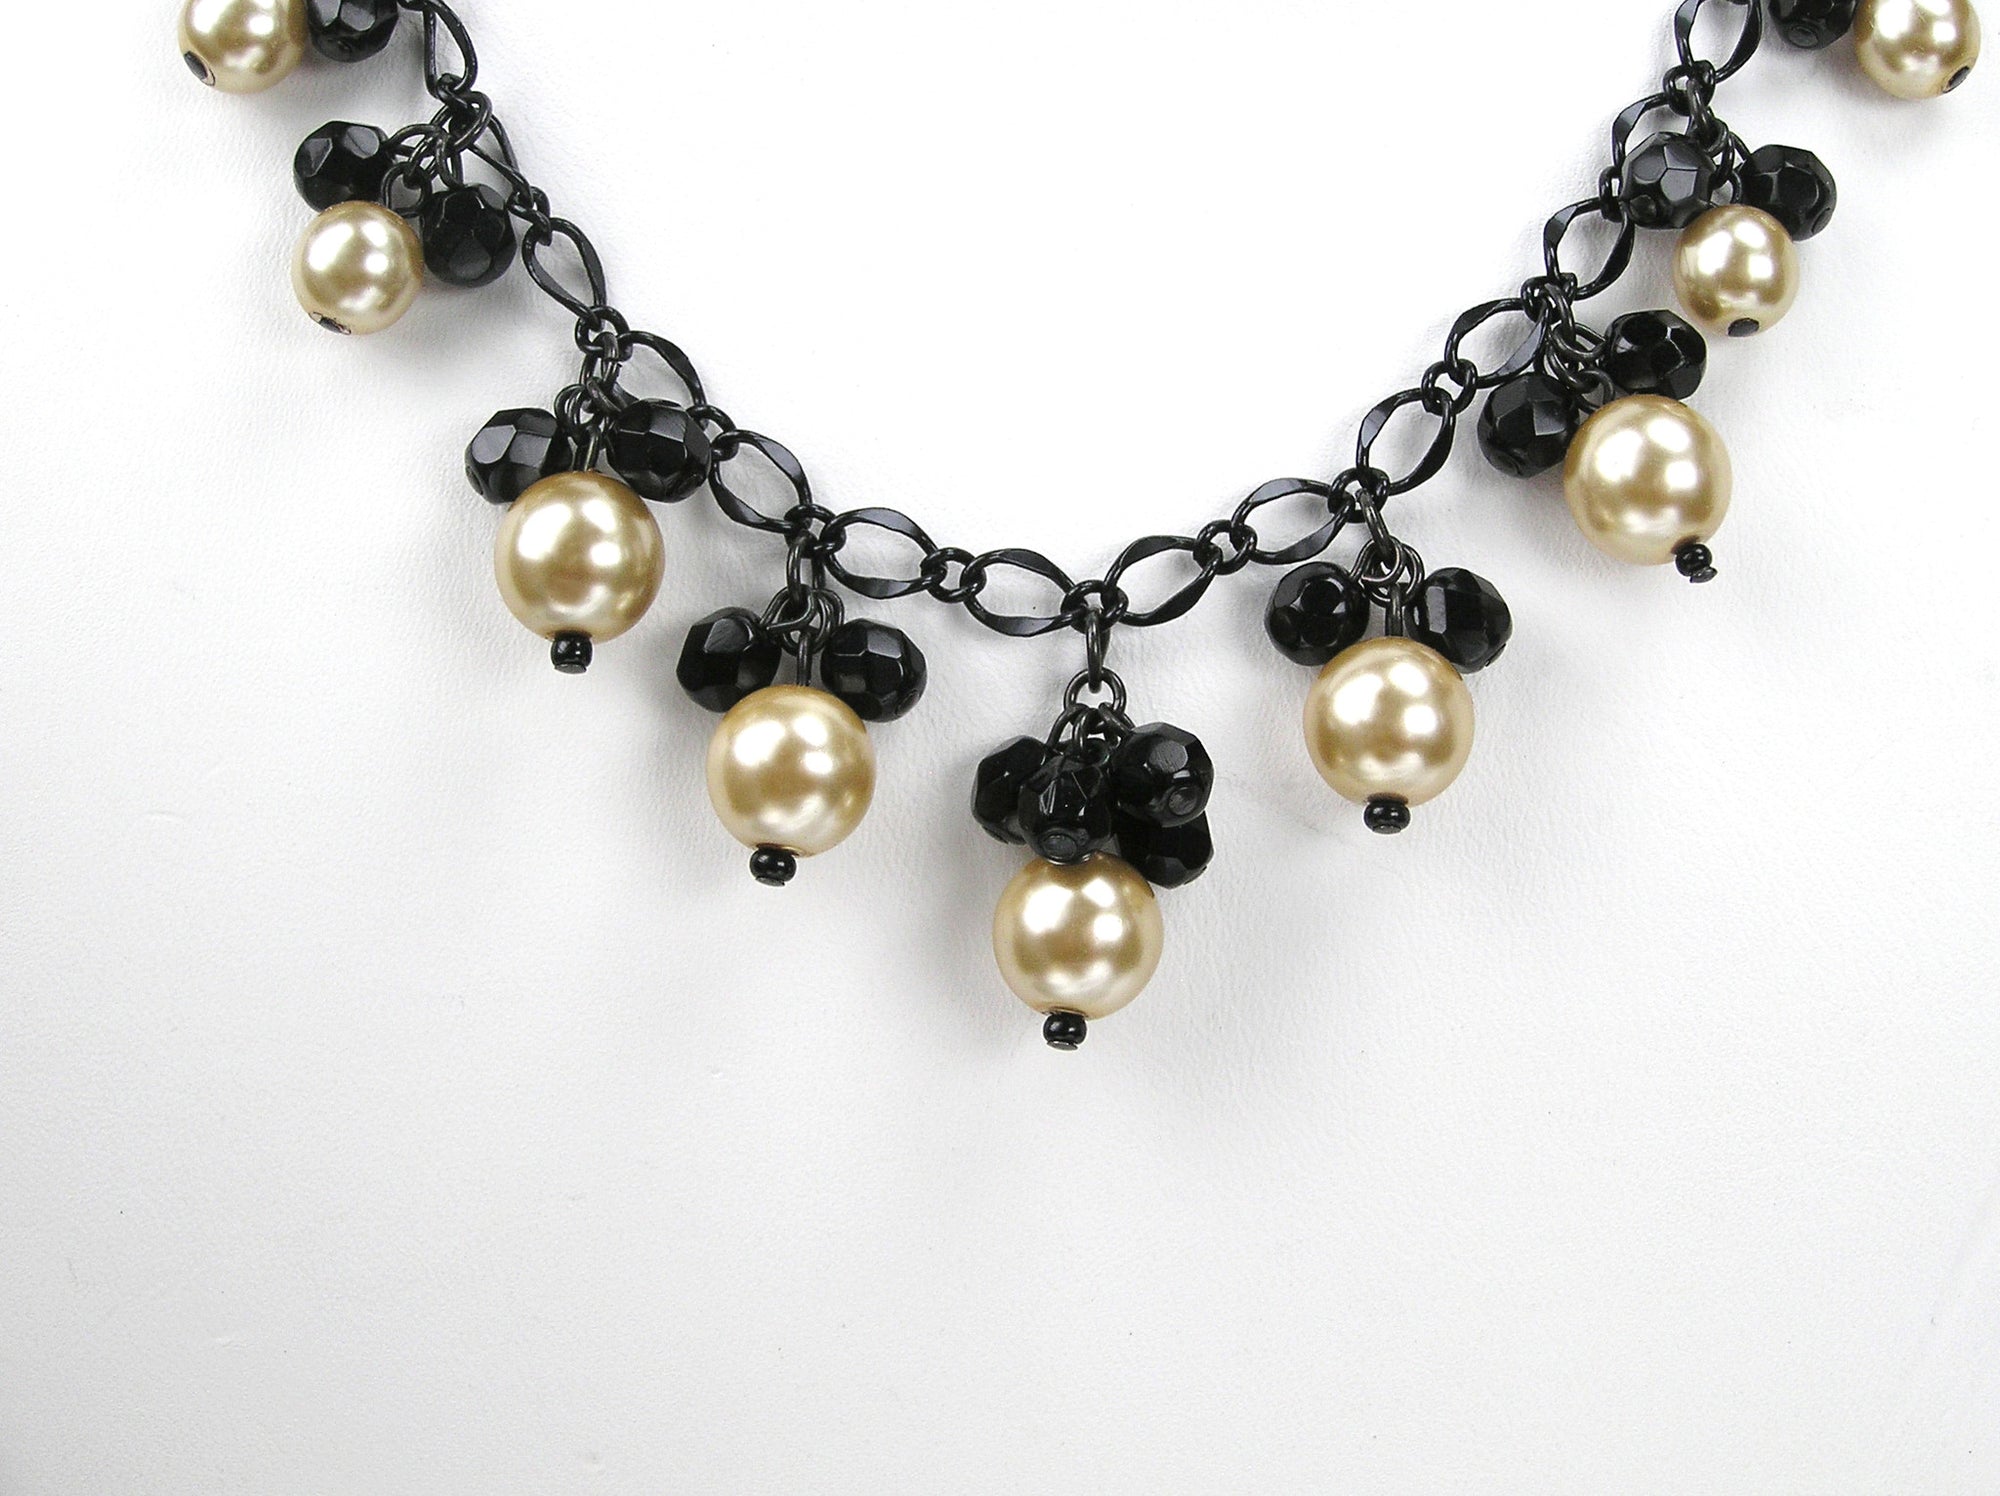 16 Inch Handmade Gold and Black Czech Glass Beads Dangle Necklace